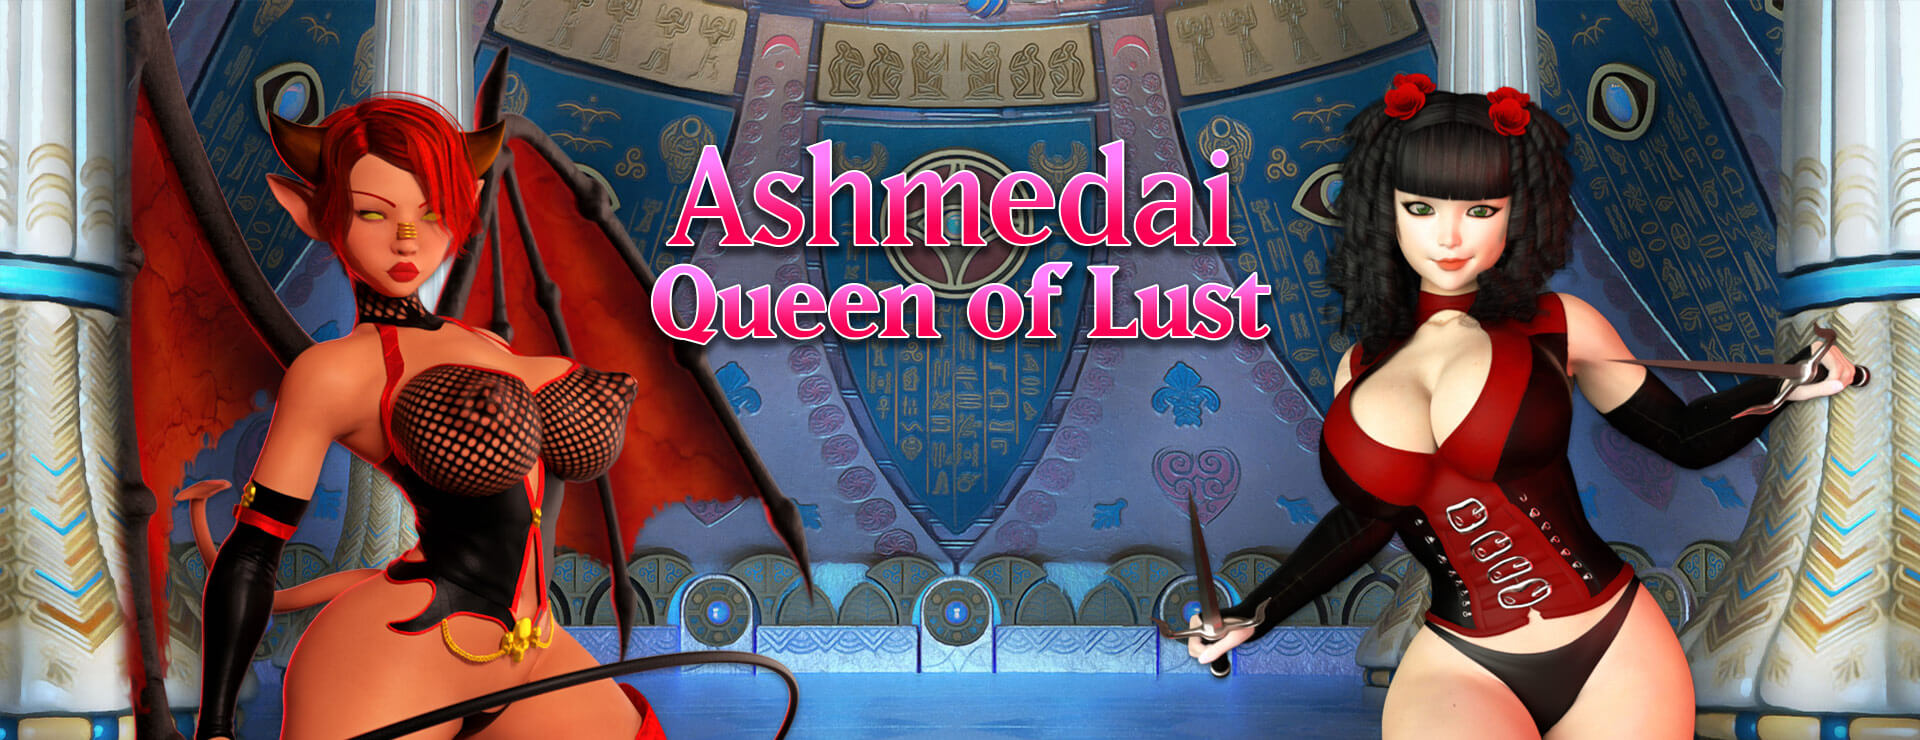 Ashmedai - Queen of Lust - 角色扮演 遊戲